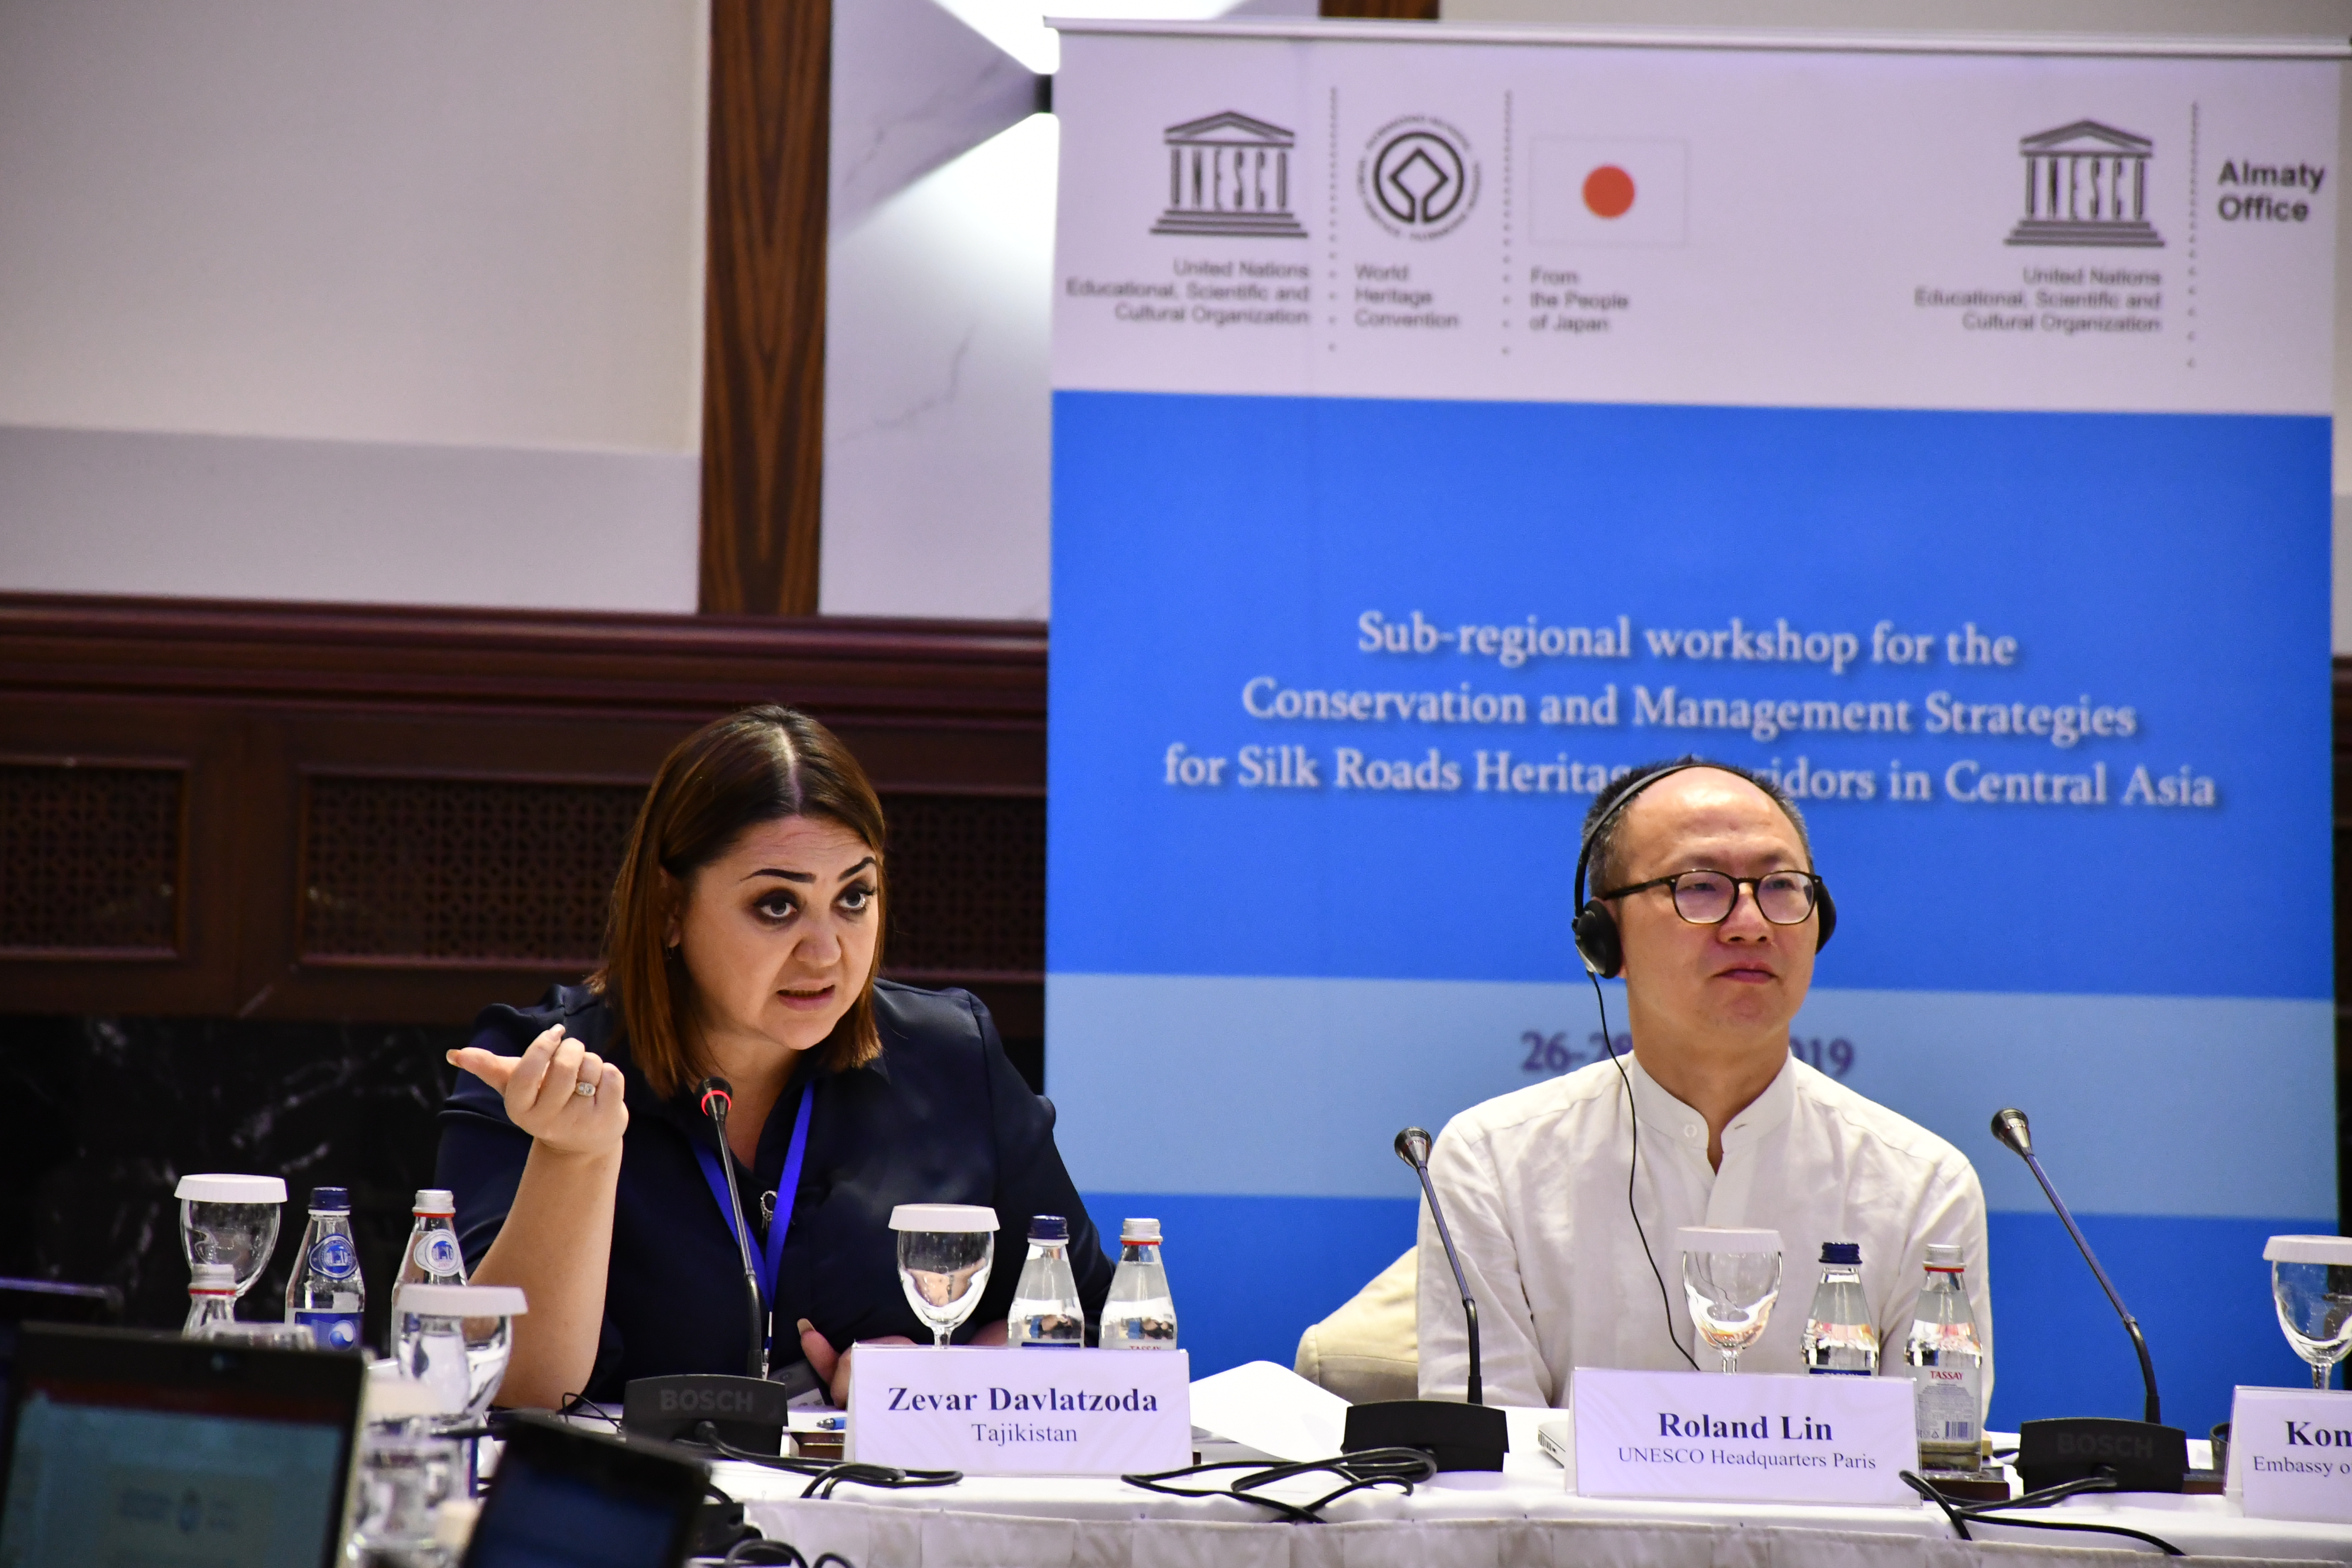 Subregional Workshop for Conservation and Management Strategies for Silk Roads Heritage Corridors in Central Asia. Almaty, 2019. Mr. Roland Lin and Ms. Zevar Davlatzoda